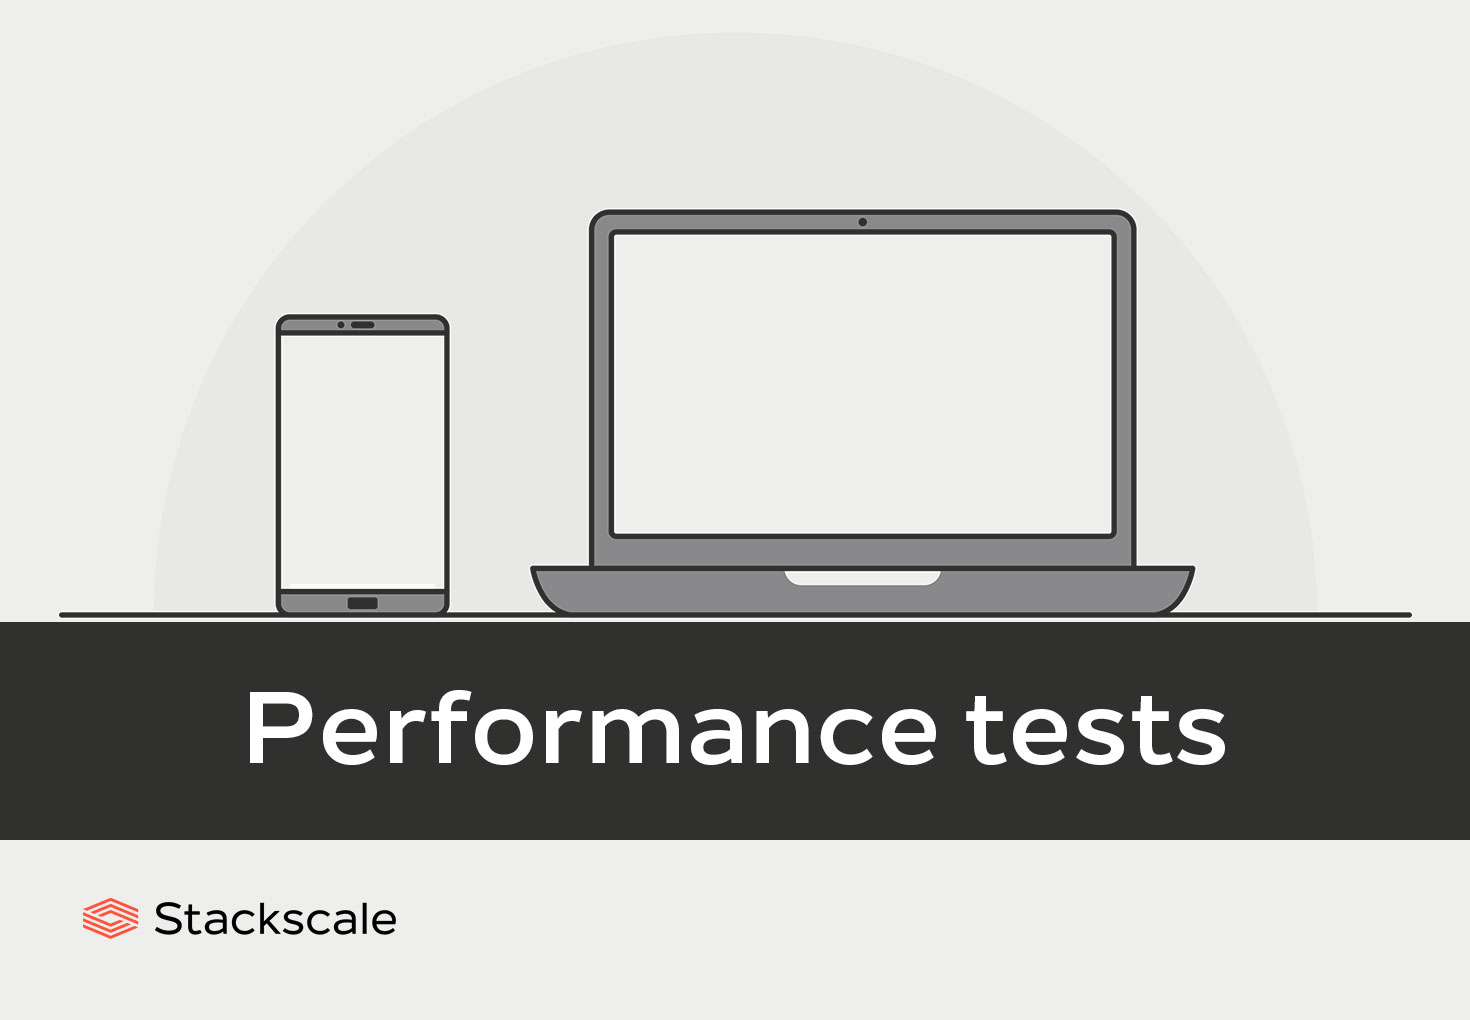 Types of performance tests